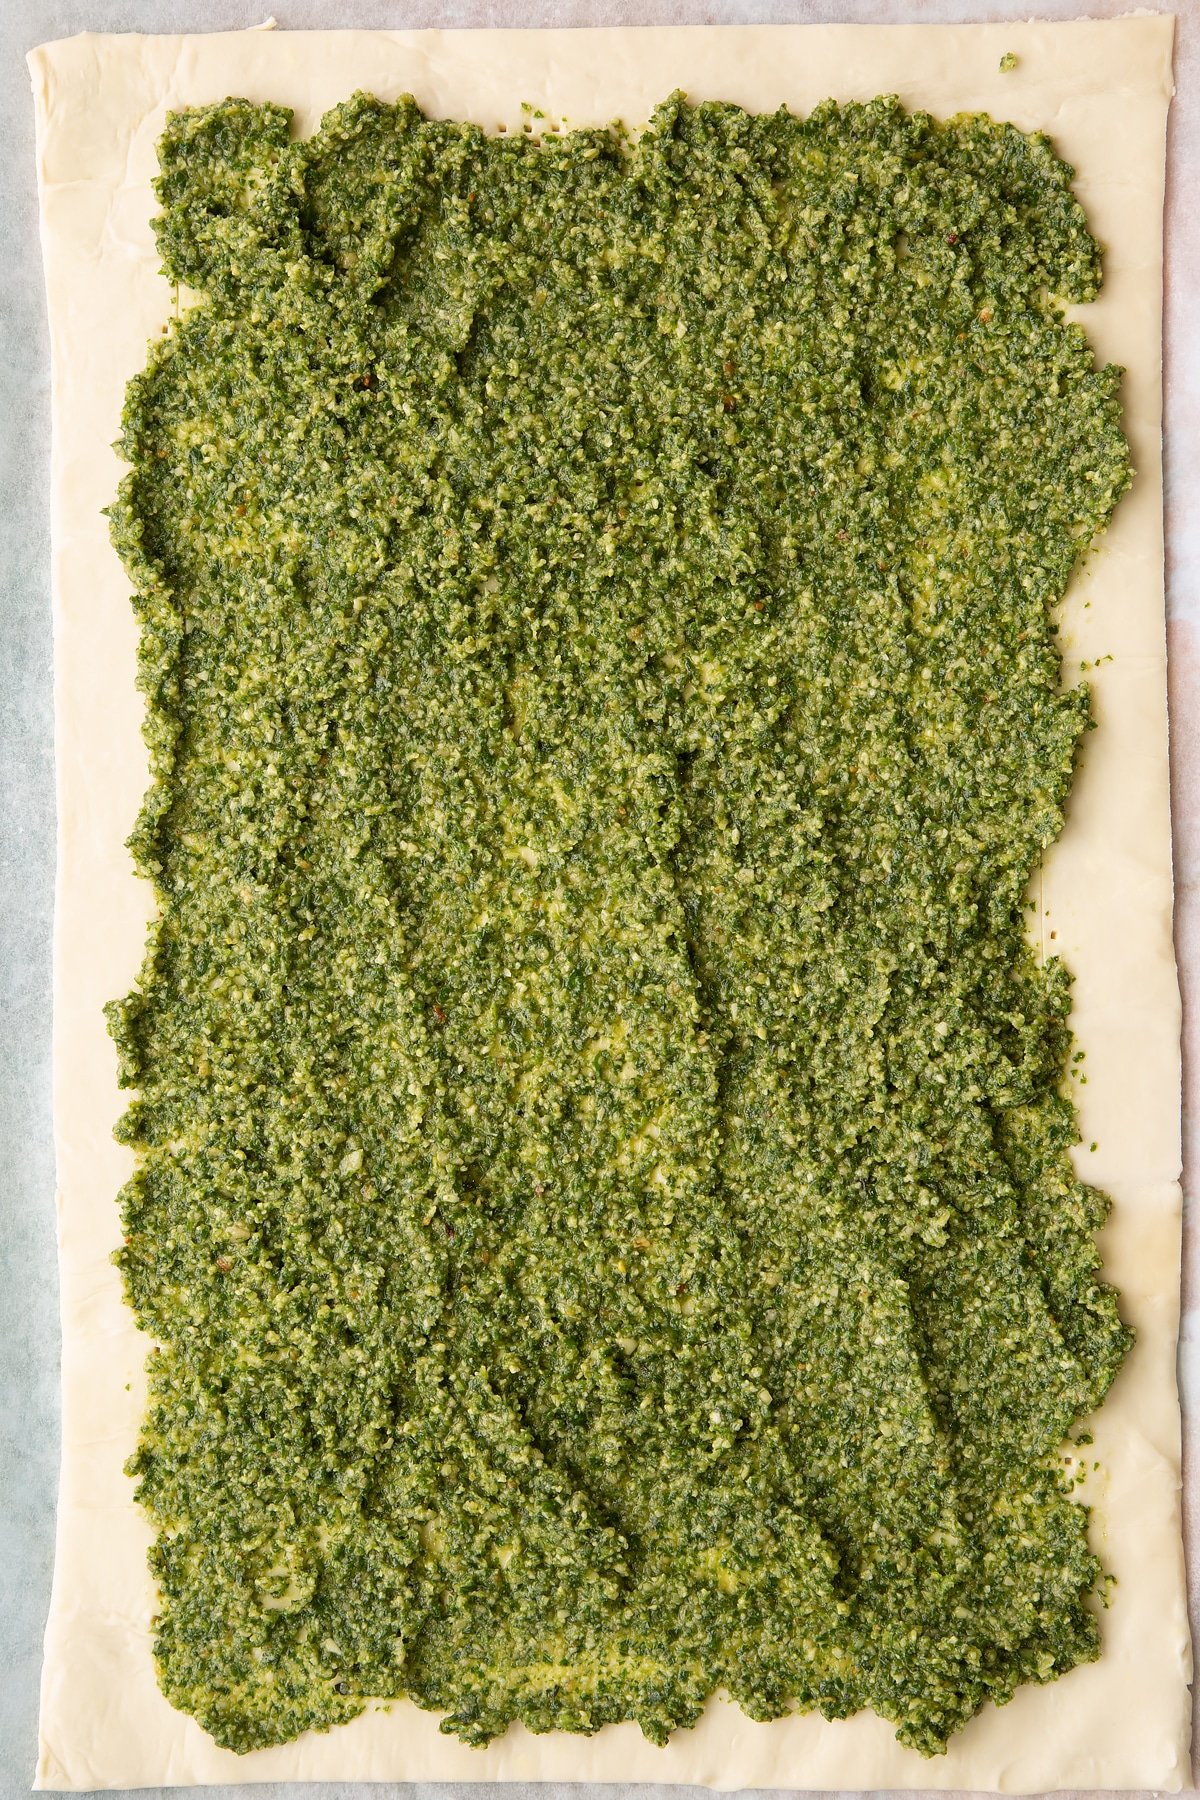 Spreading the pesto across the top of the puff pastry.